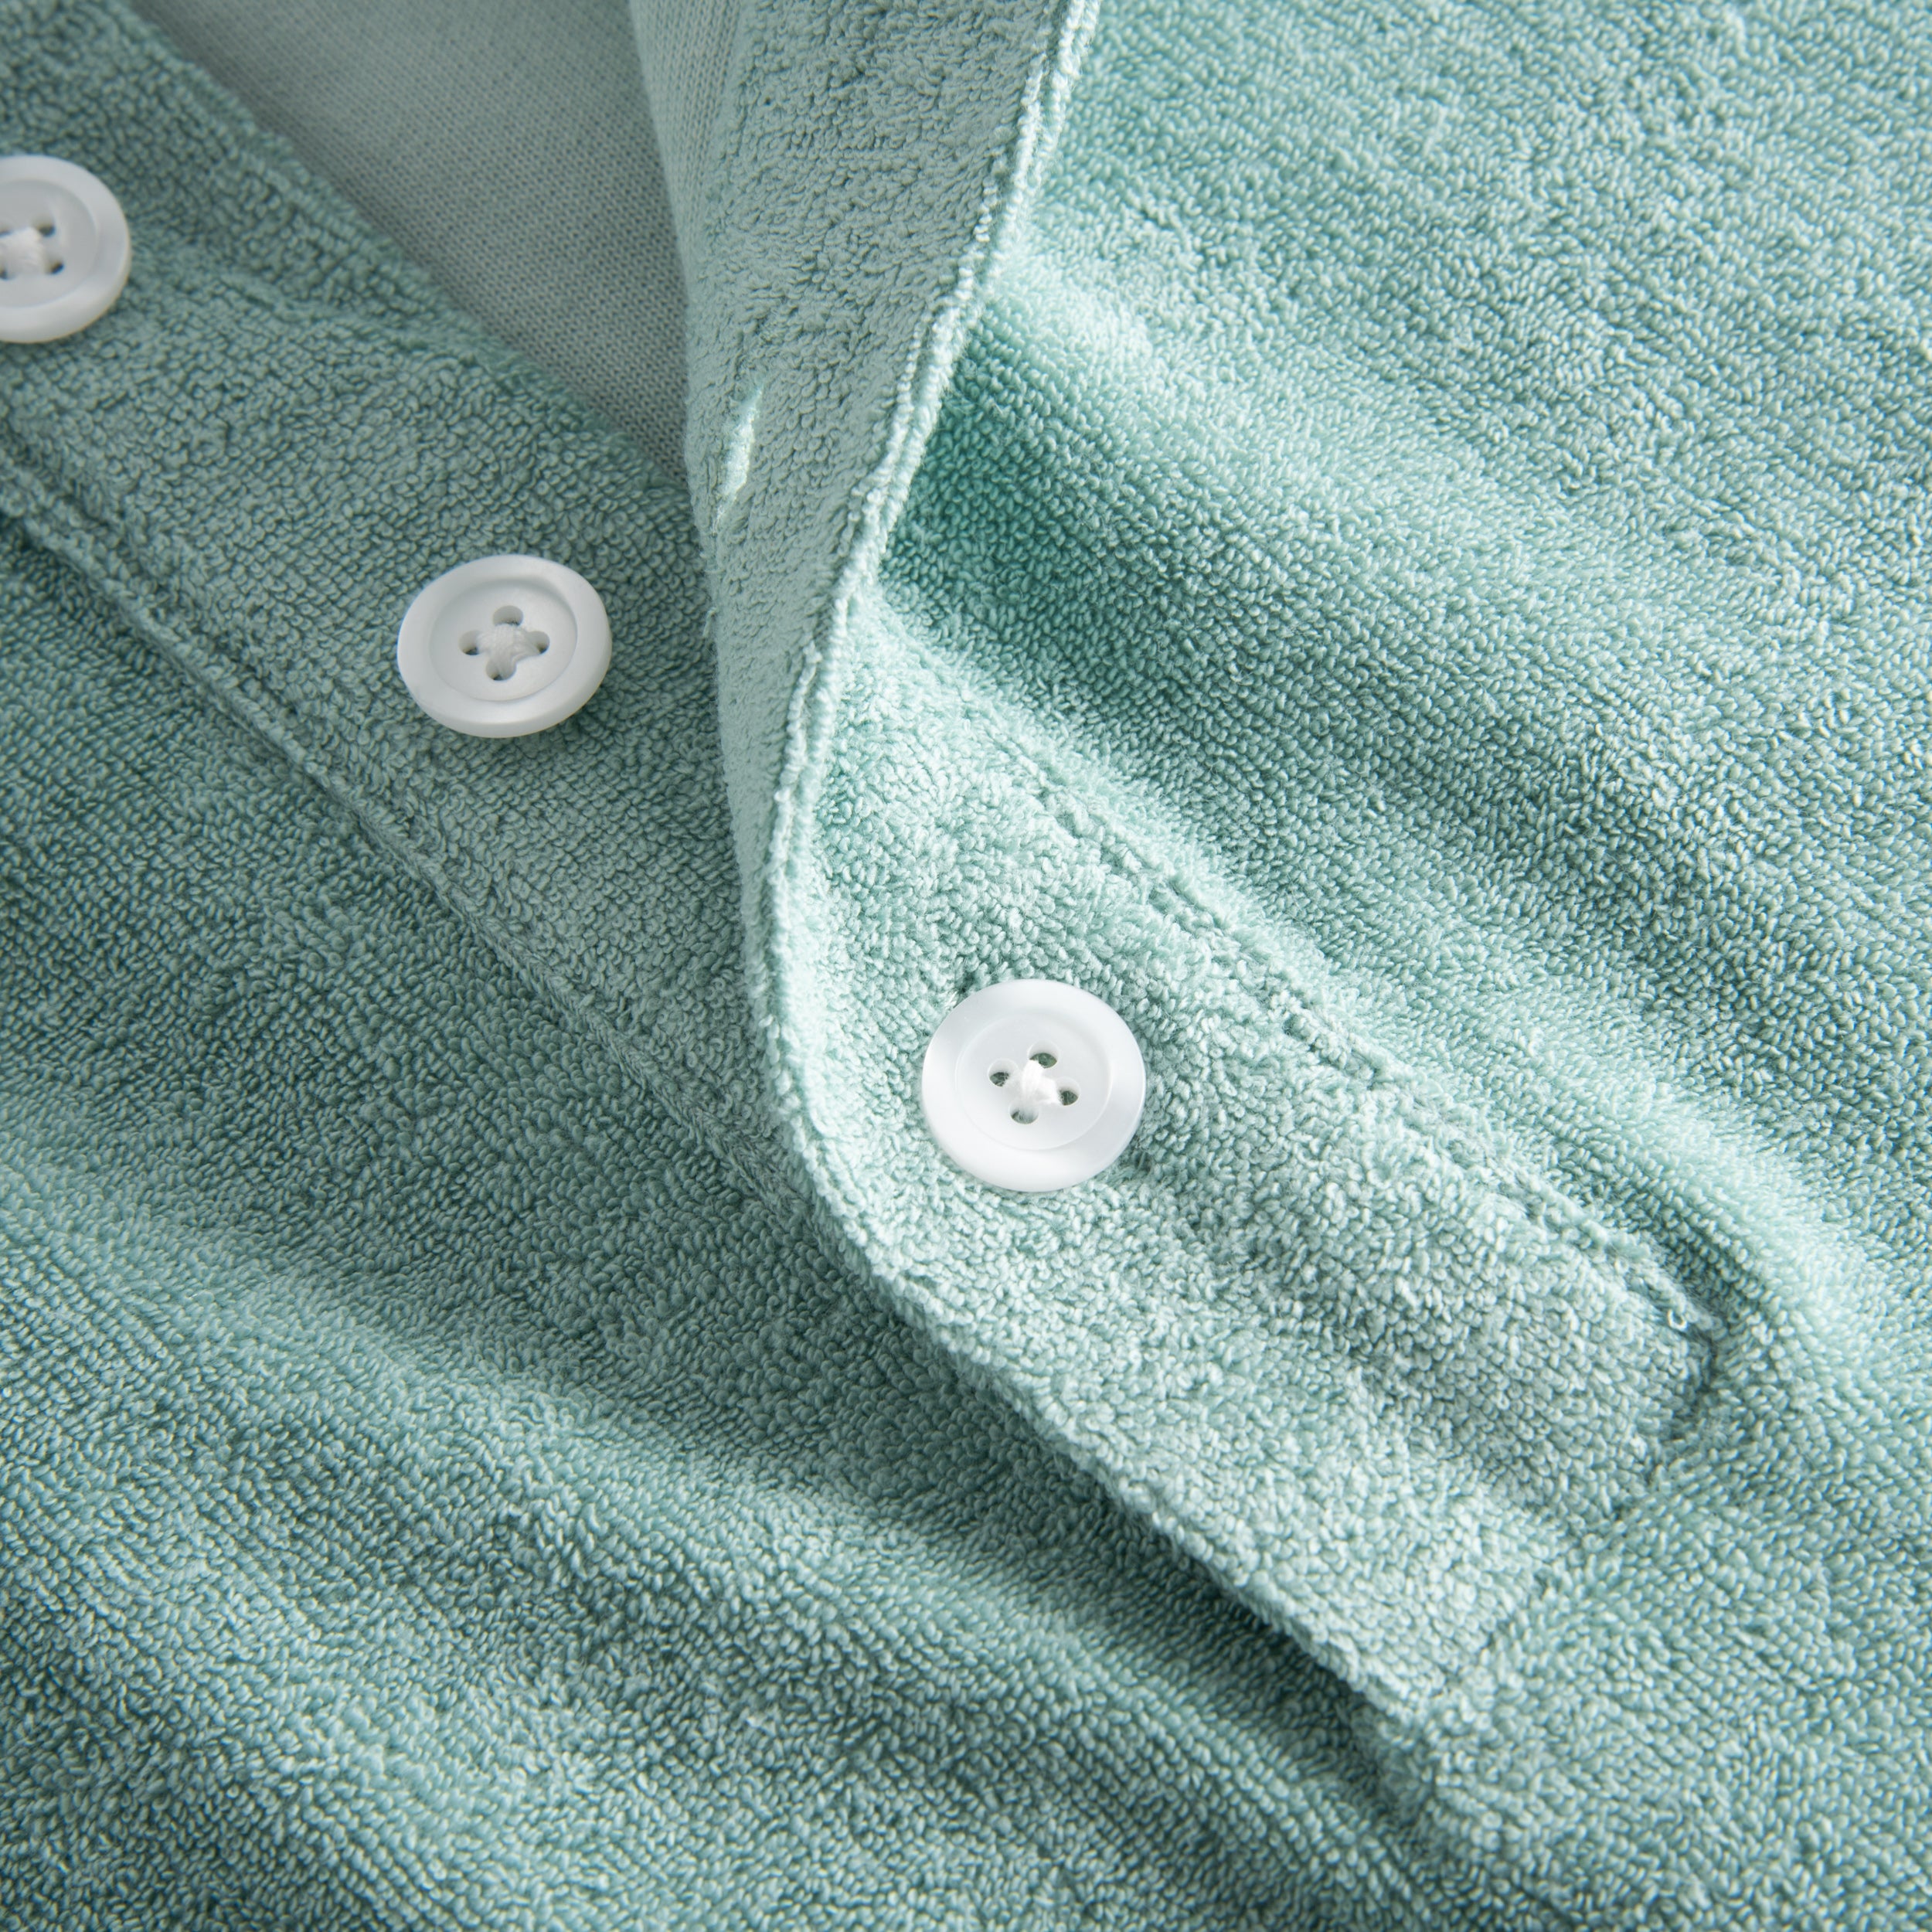 White buttons on green shirt in Terry toweling fabric